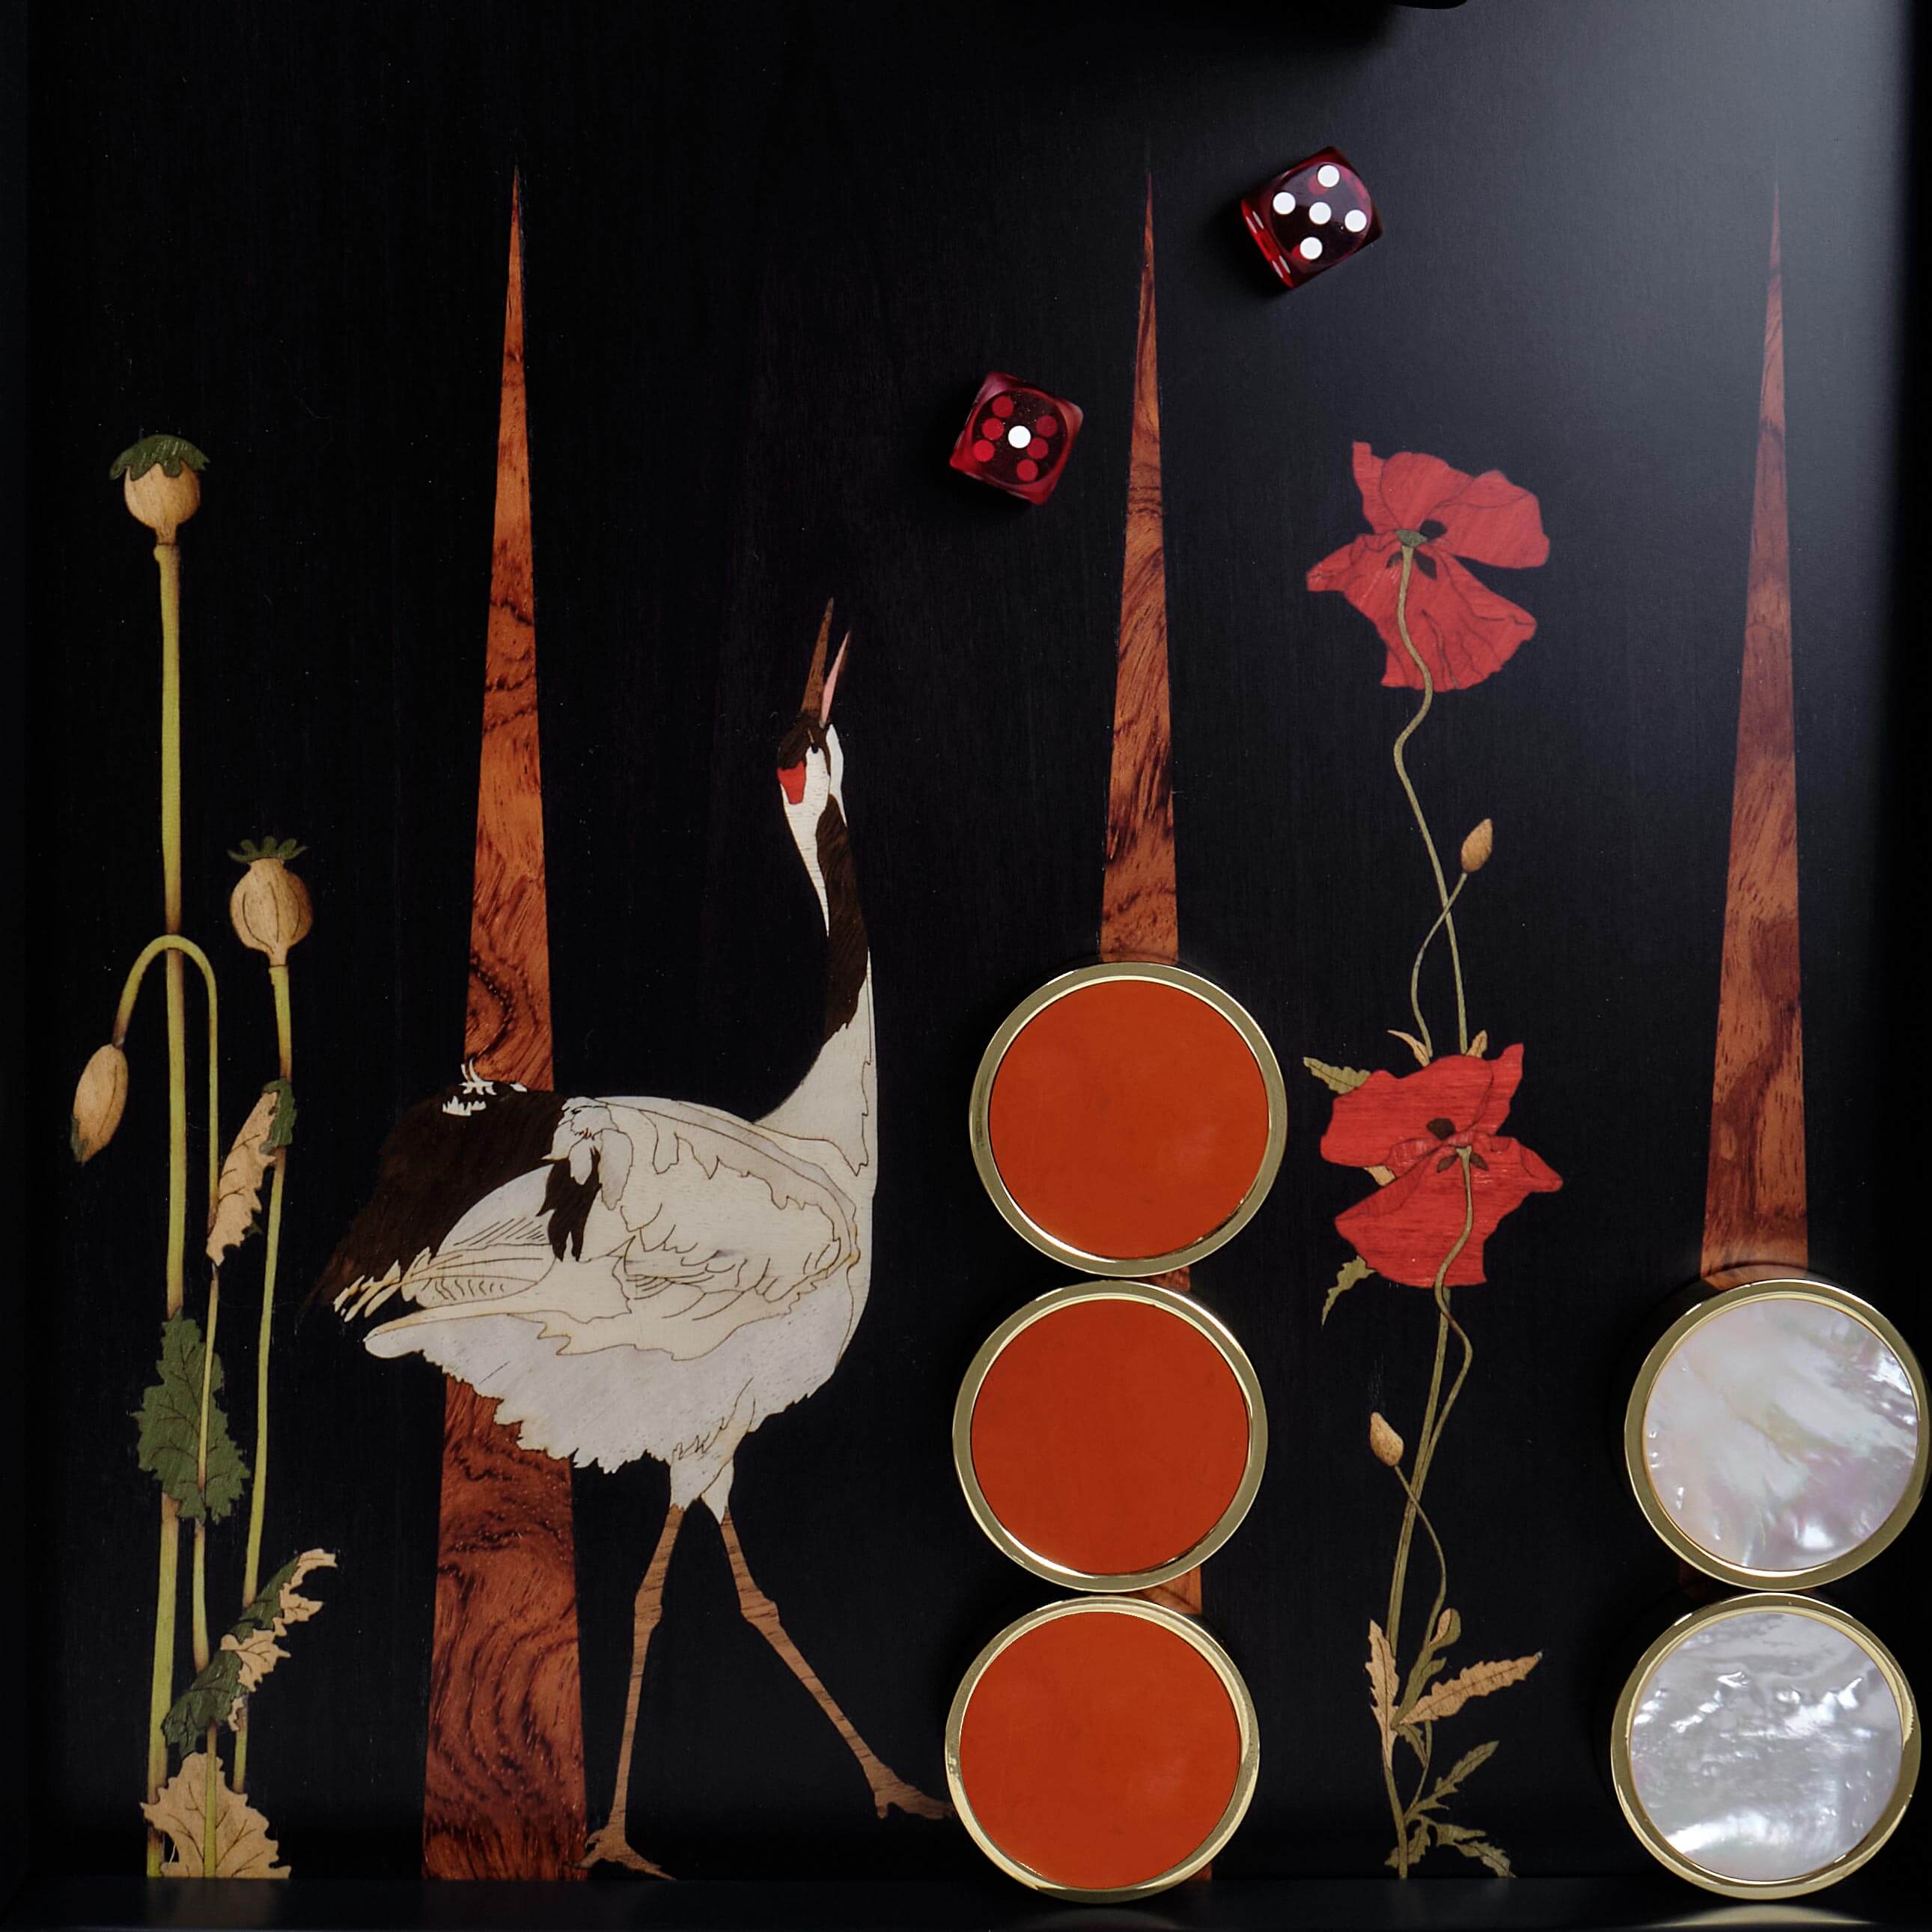 Poppy and Crane backgammon board with red jasper and white mother of Pearl playing pieces